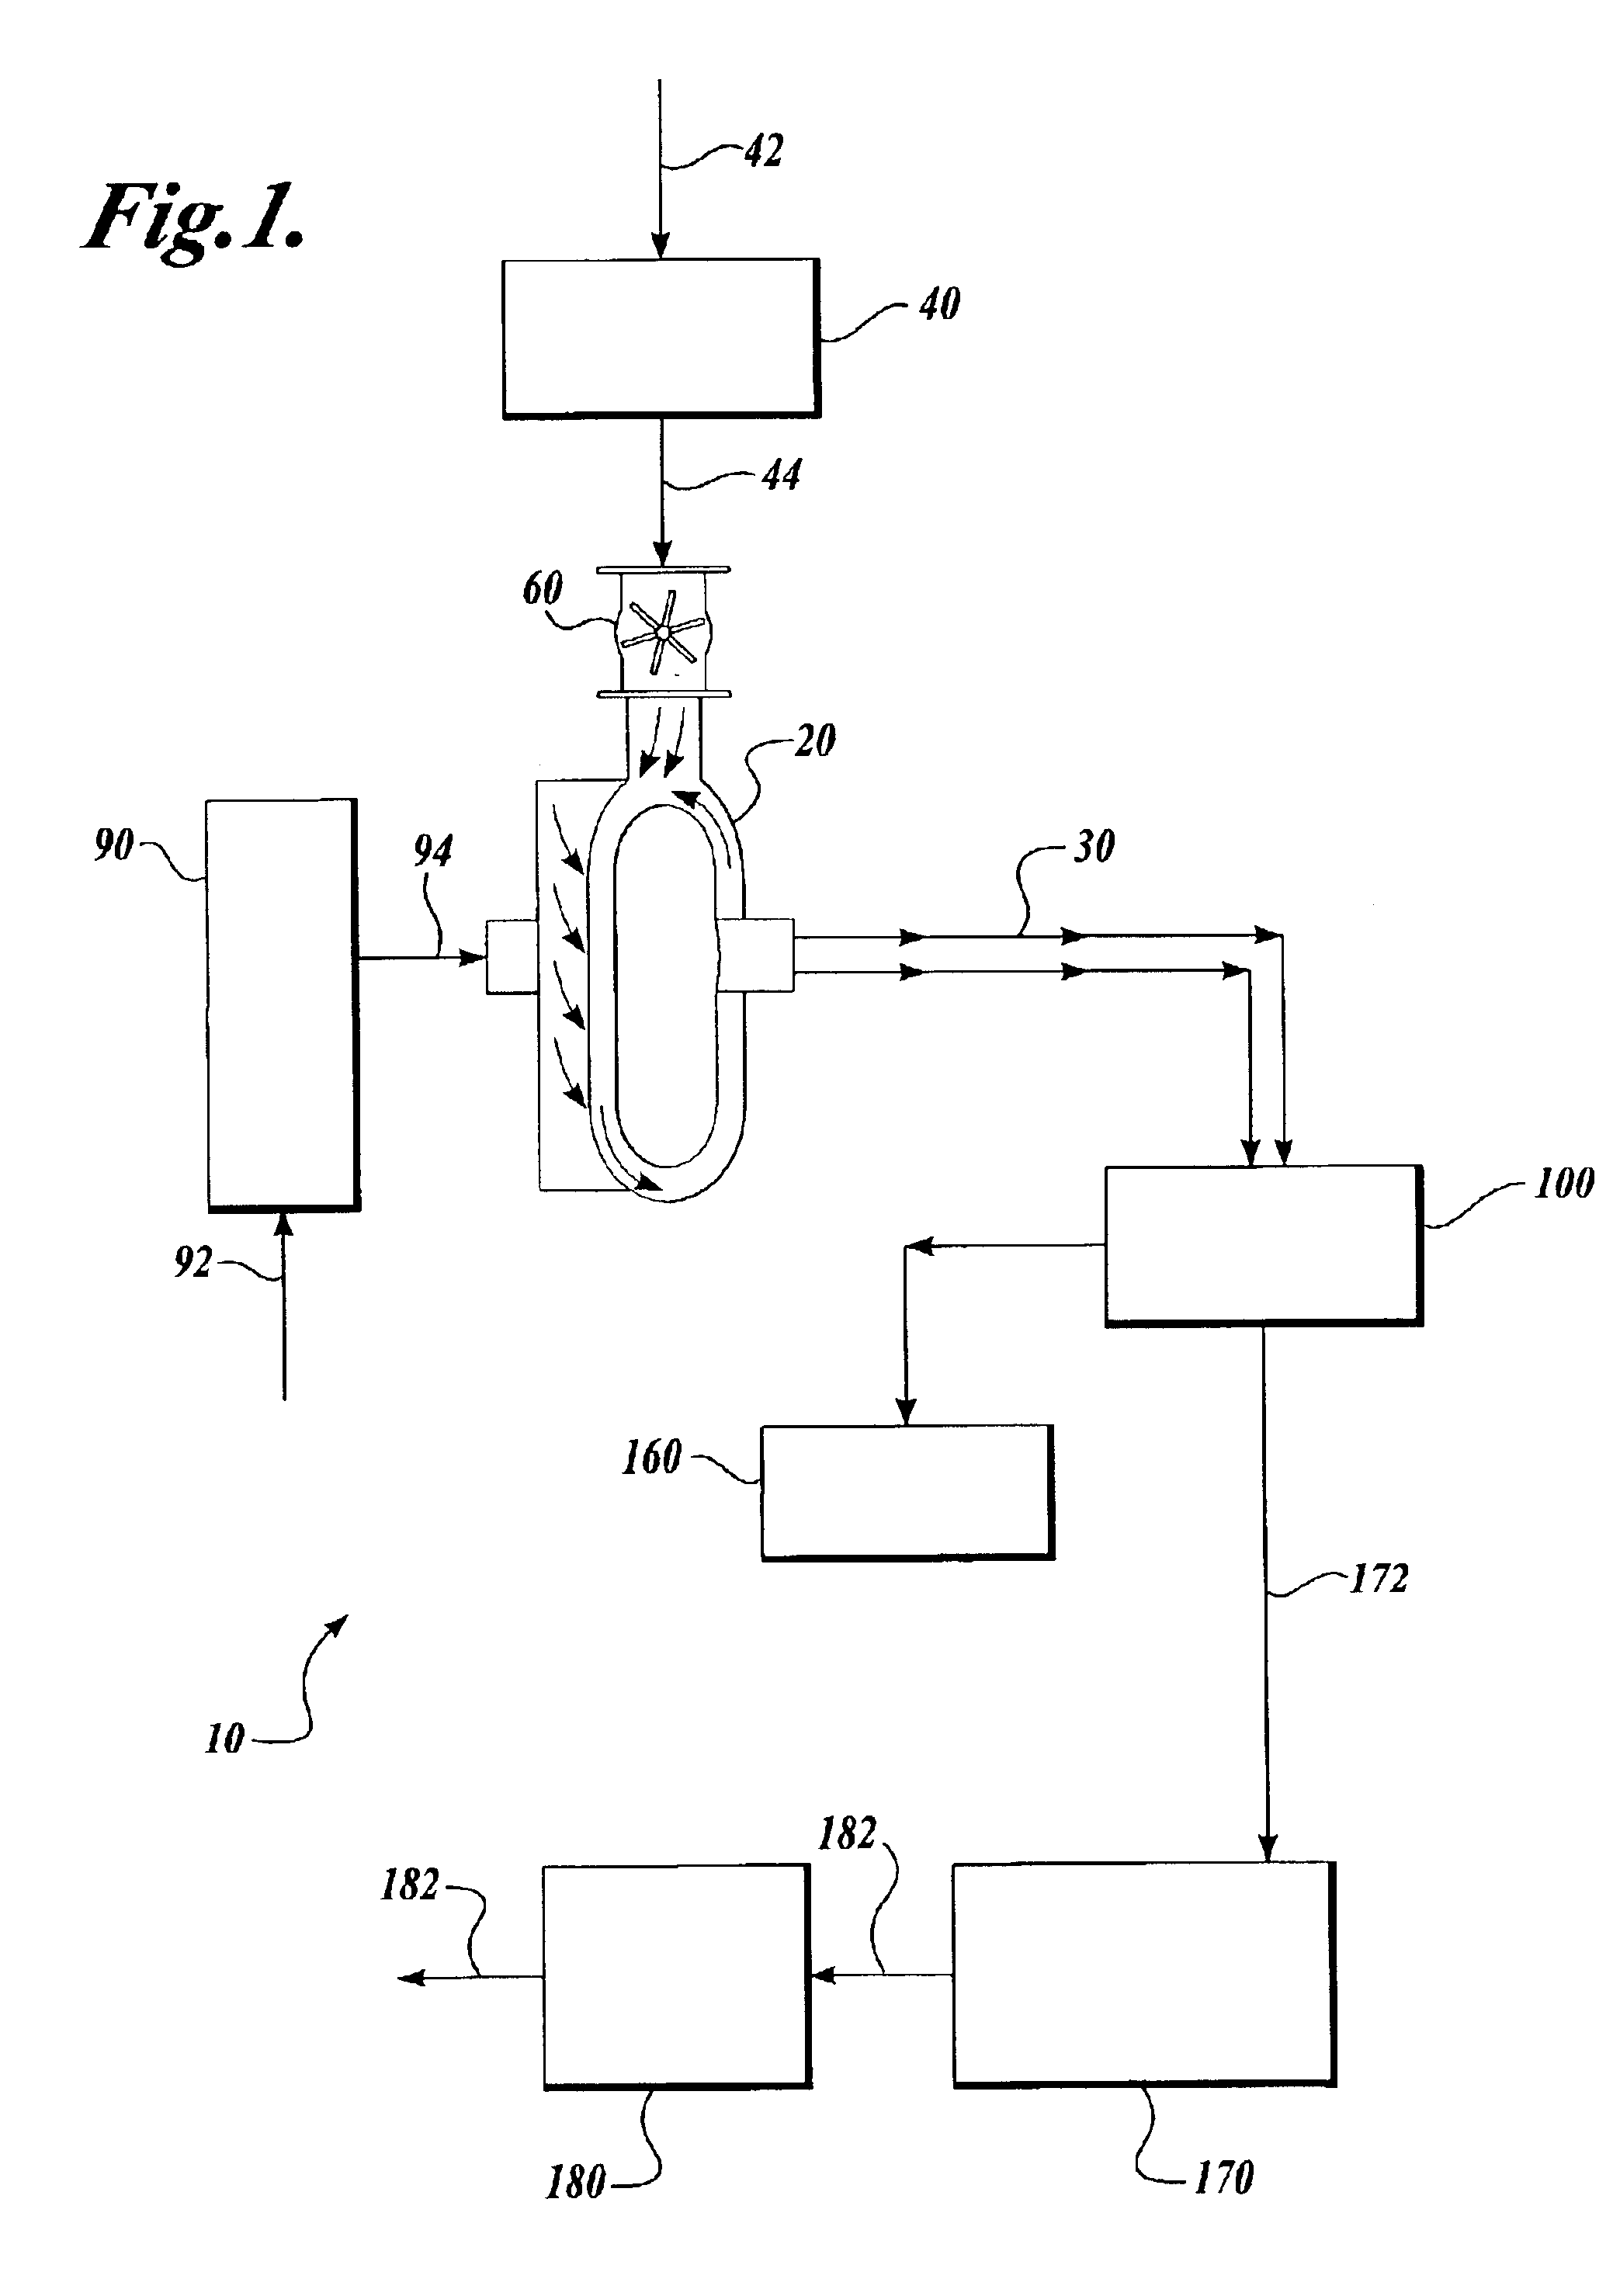 System for producing dried singulated cellulose pulp fibers using a jet drier and injected steam